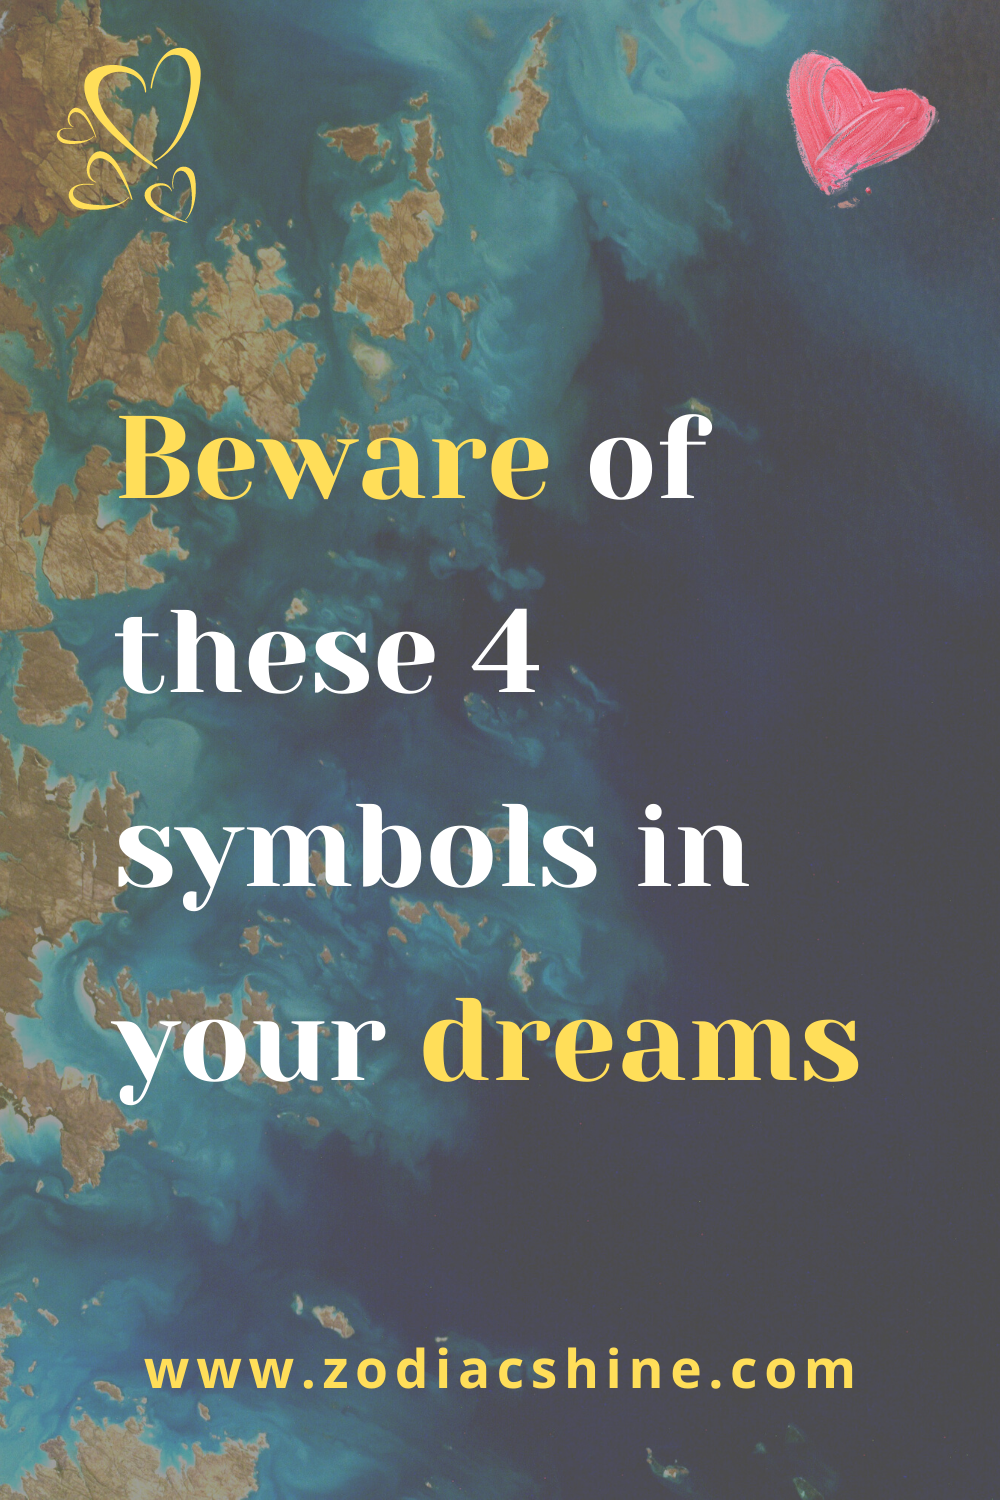 Beware of these 4 symbols in your dreams